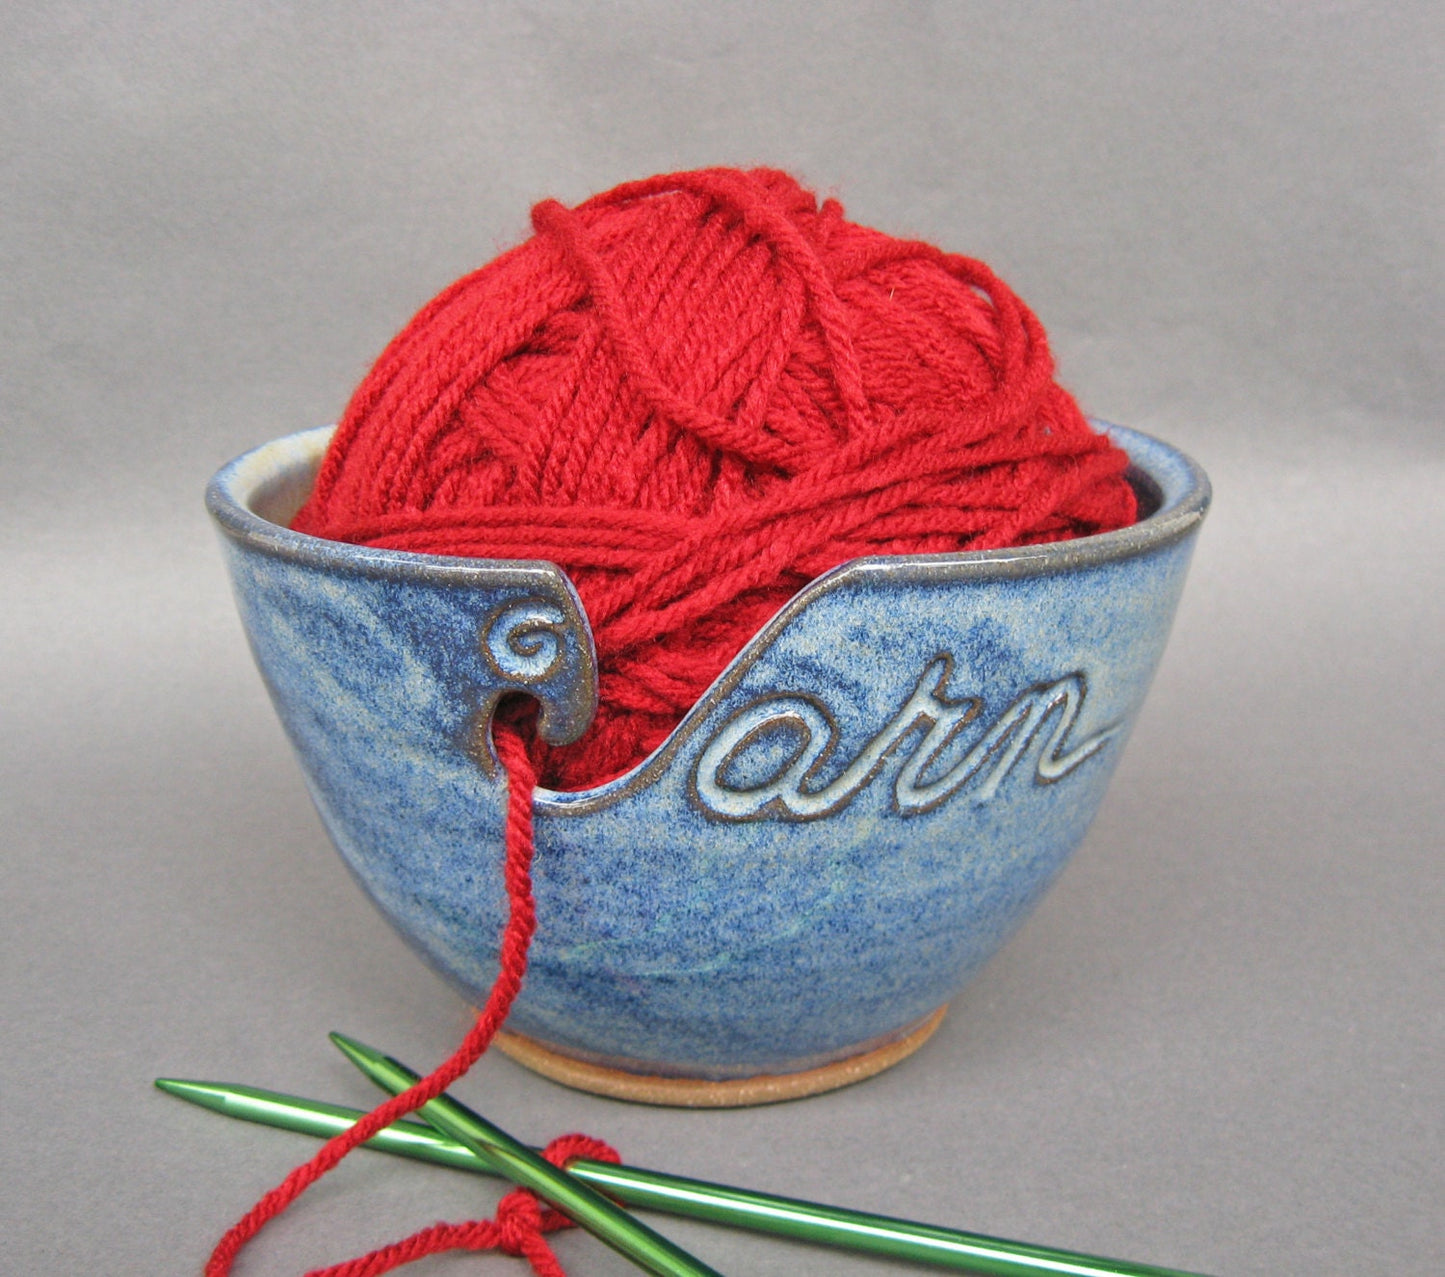 Large Yarn Bowl for Crochet and Knitting Fits Whole Skein - Craft Room Organization Decor in Variegated Blue